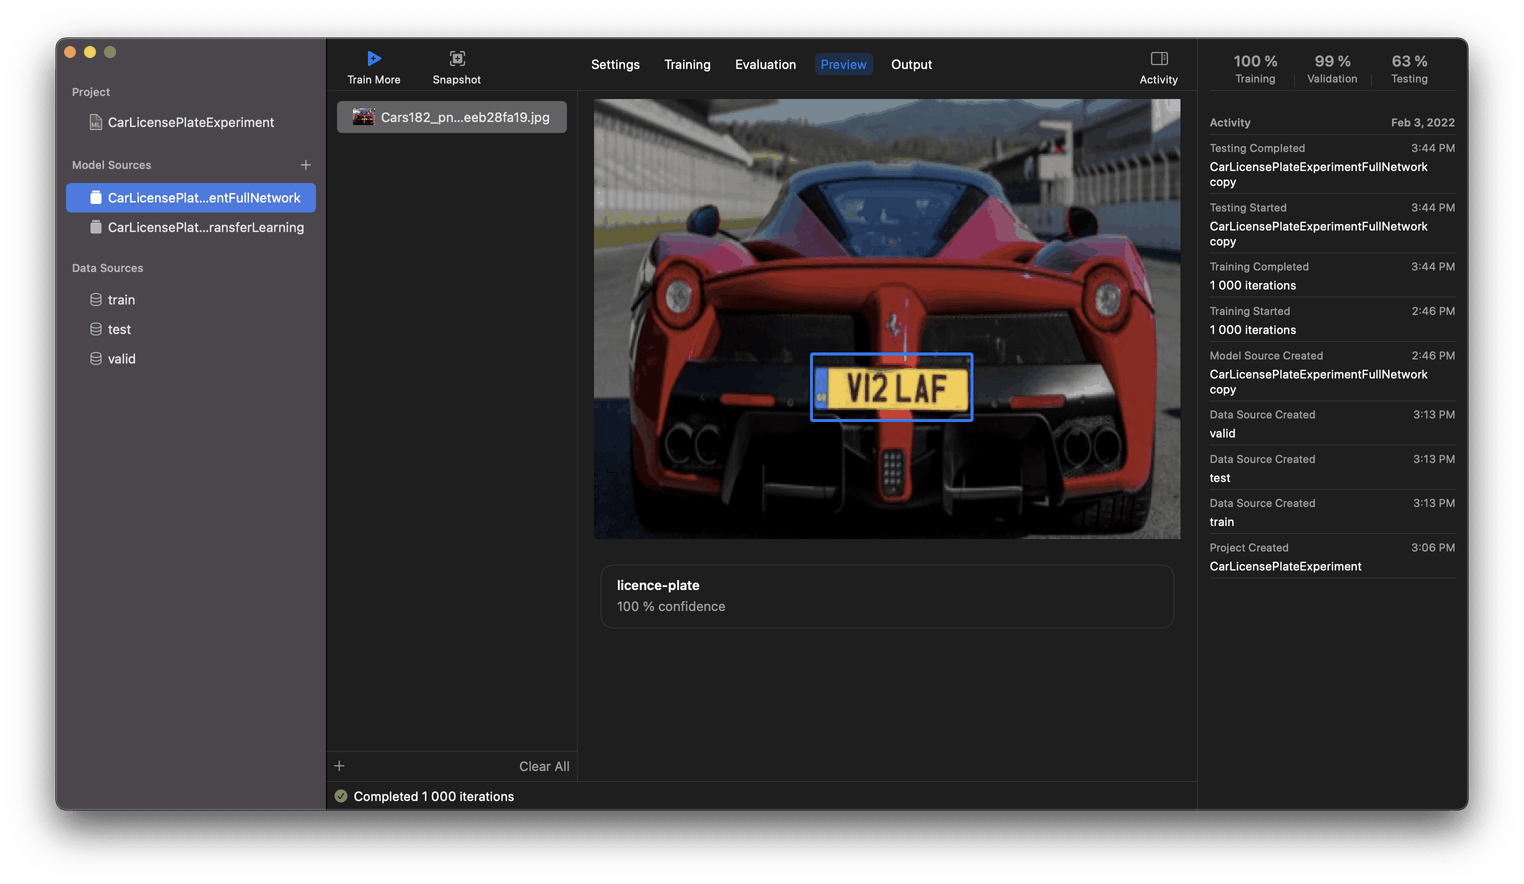 The preview tab allows us to test our results, the license plate in this image has successfully been identified